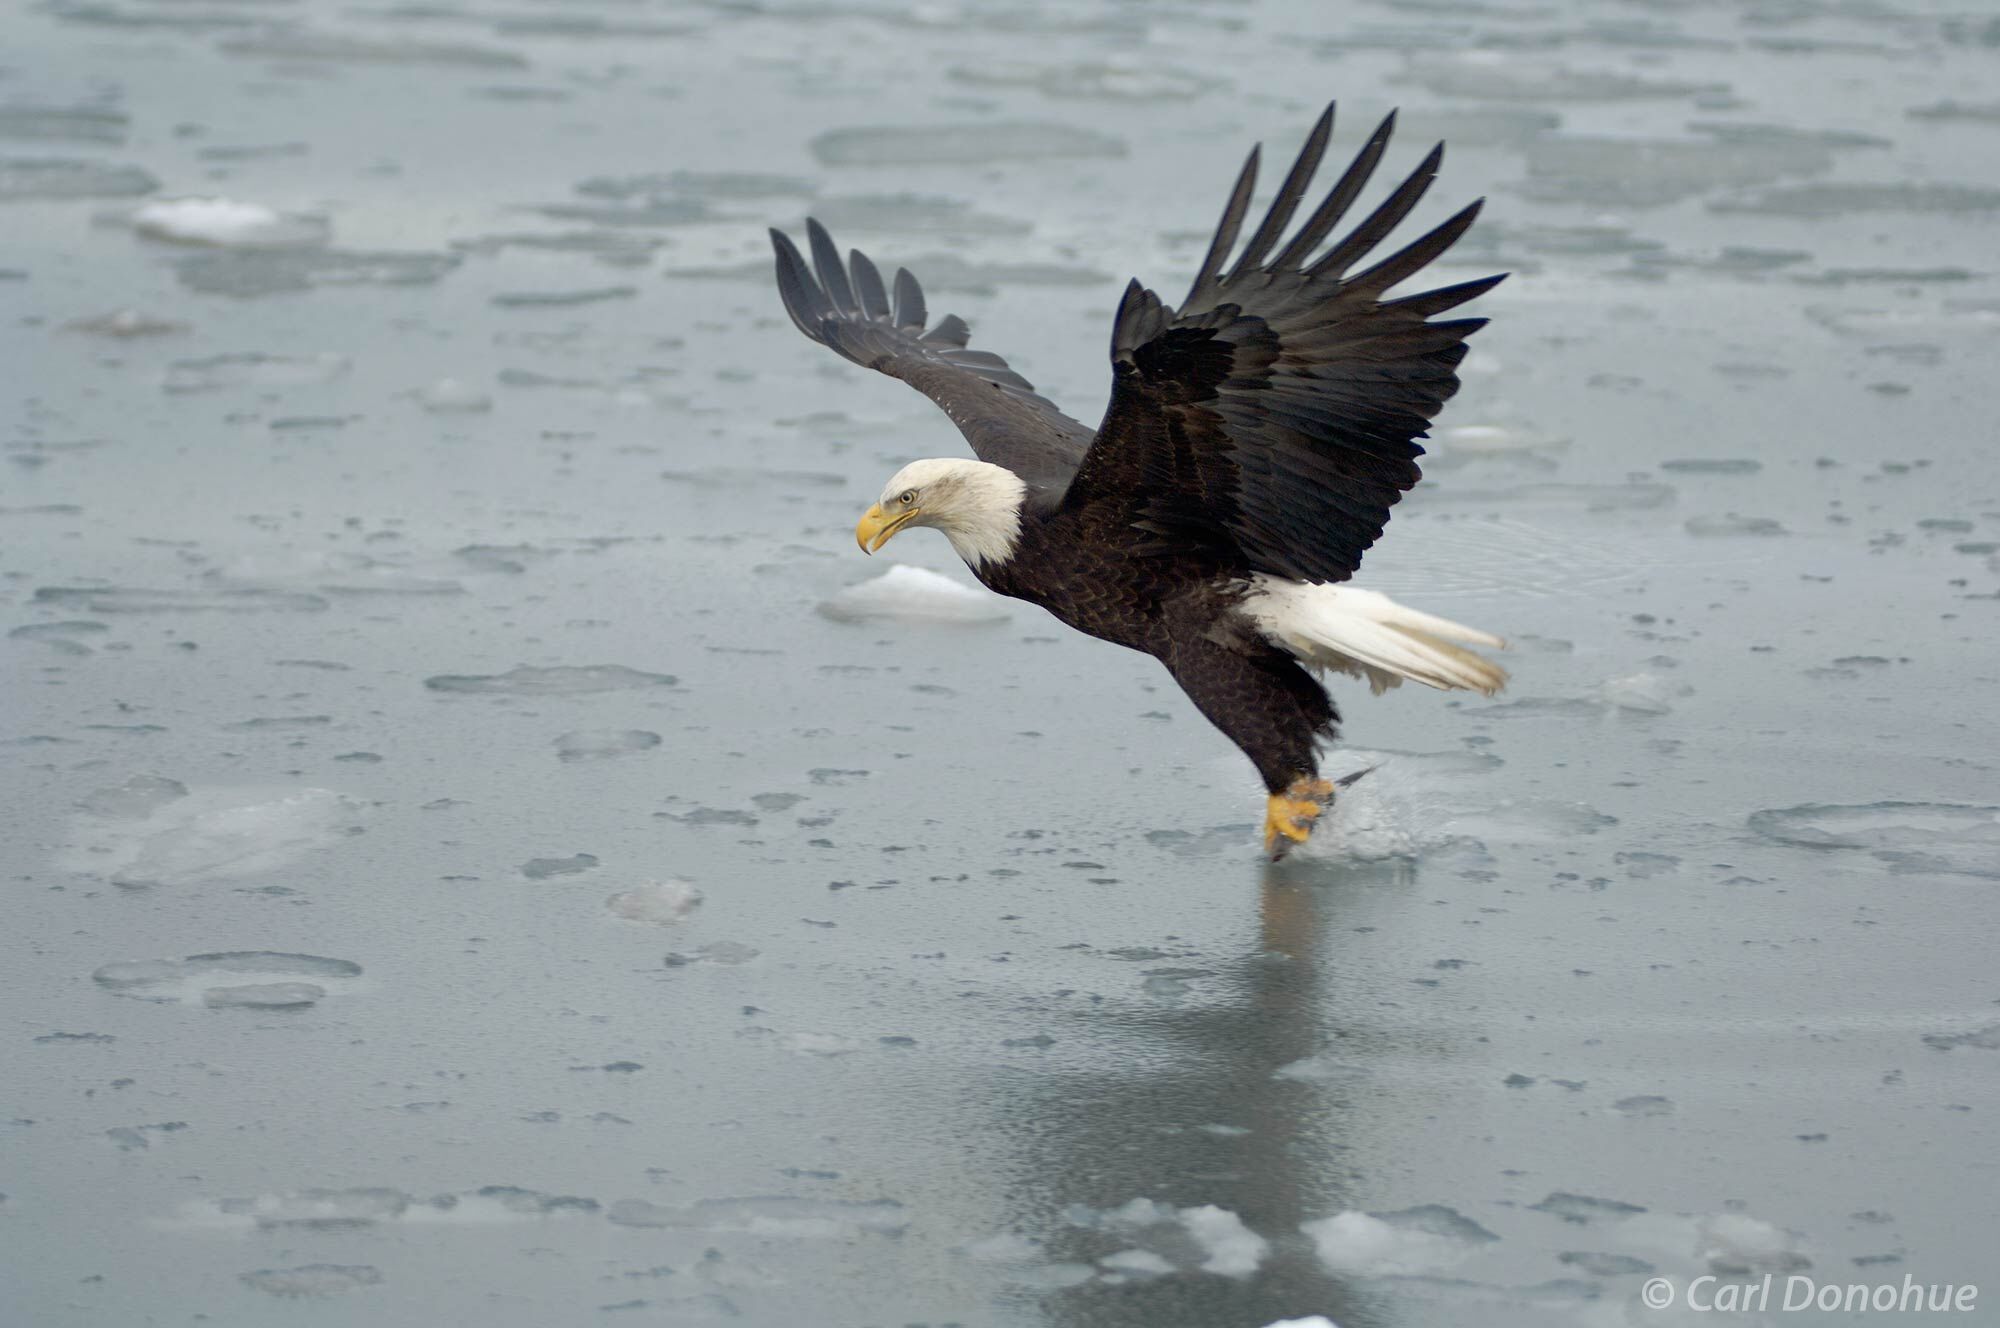 A bald eagle deftly catches a fish in the waters of Kachemak Bay, near Homer, Alaska. The powerful bird of prey gracefully snatches...